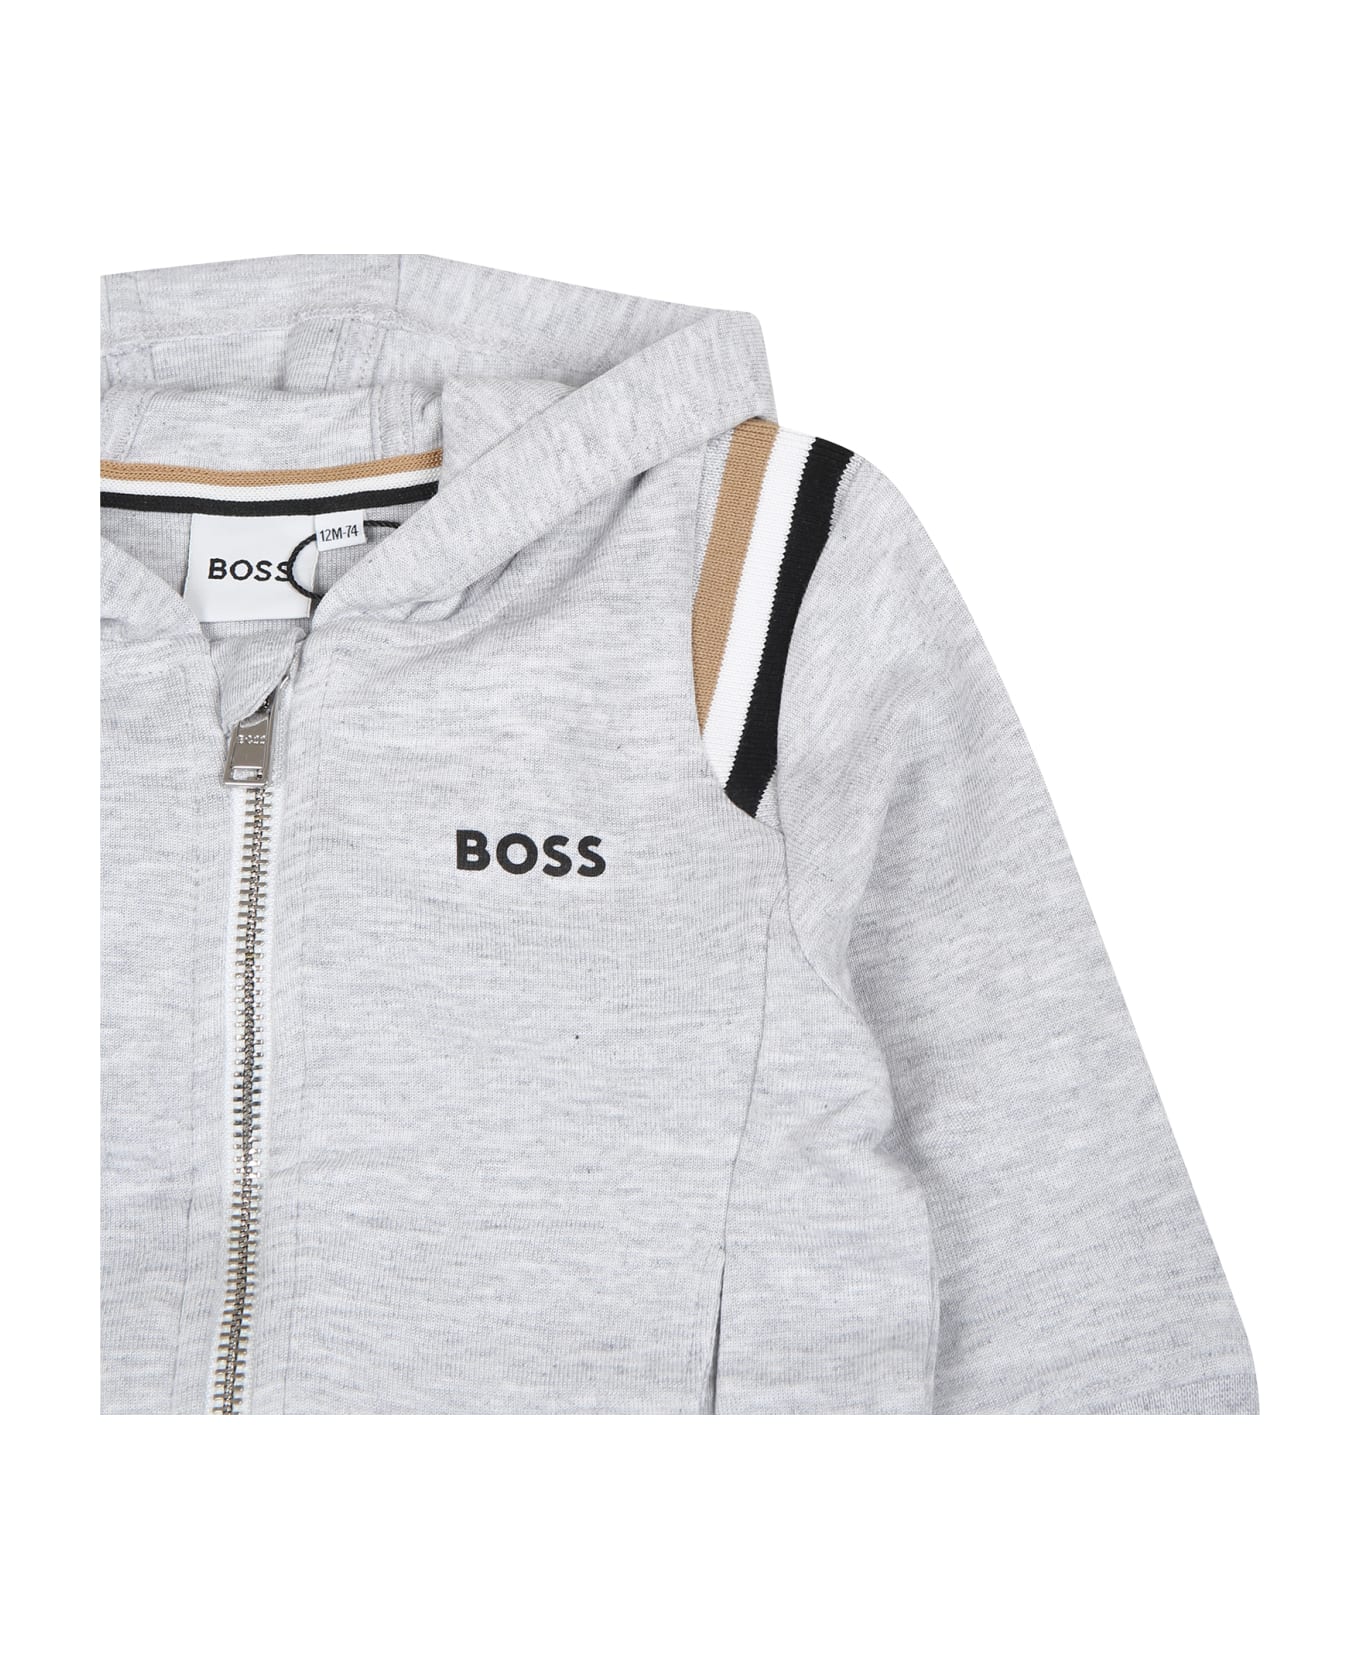 Hugo Boss Grey Suiit For Baby Boy With Logo - Grey ボトムス